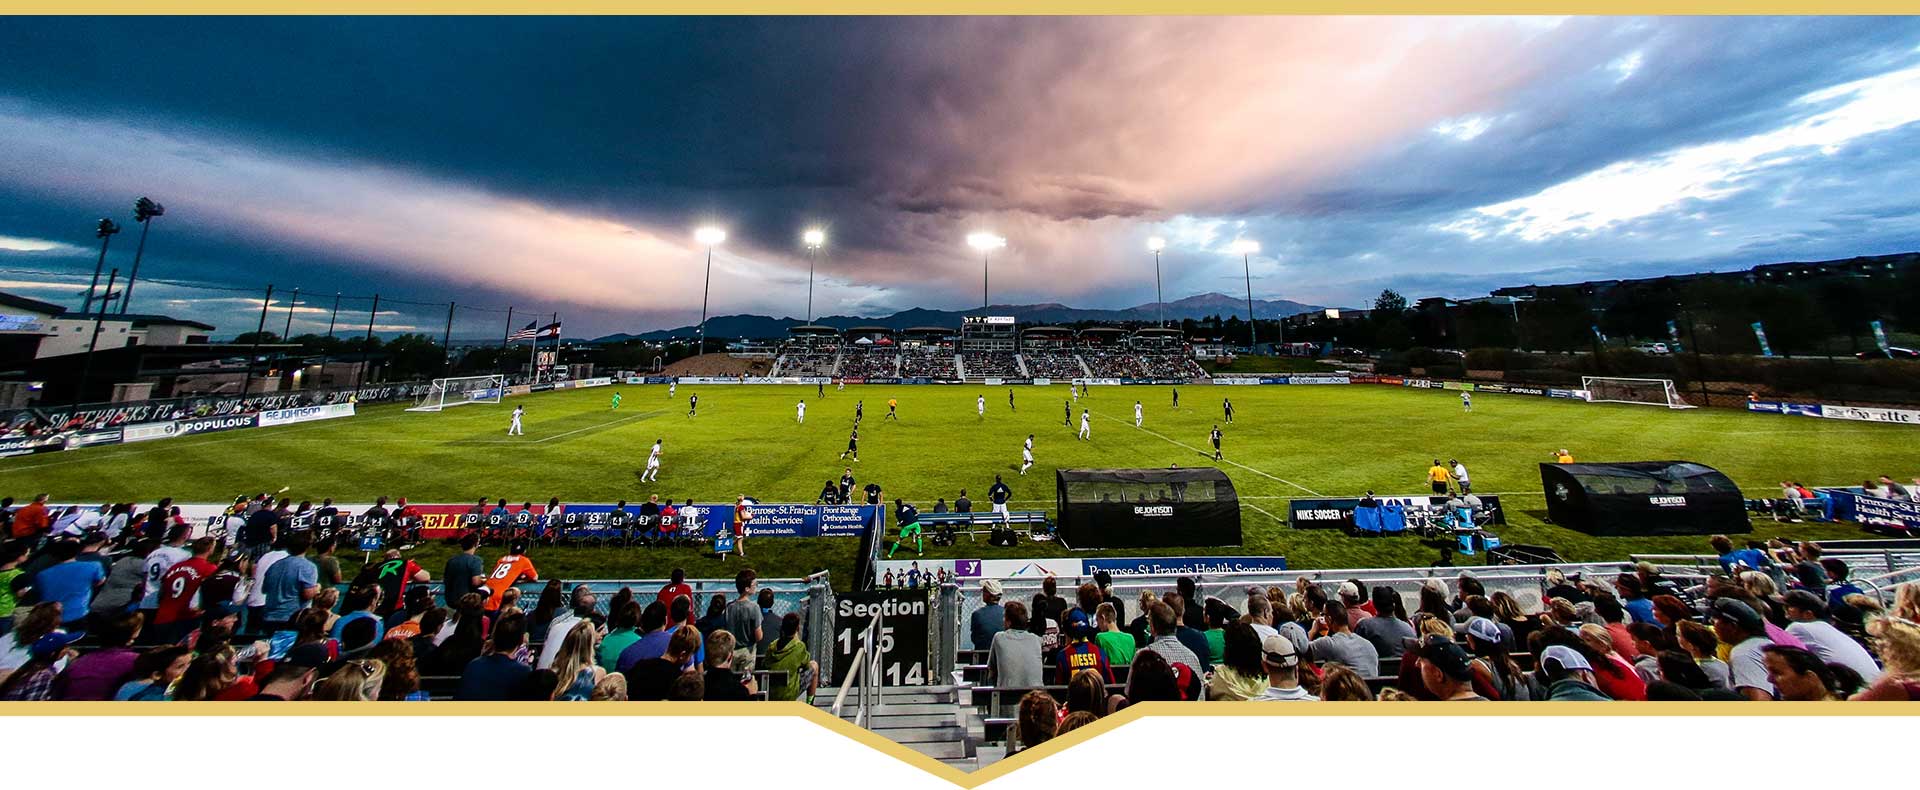 Discount tickets to the Colorado Springs Switchbacks